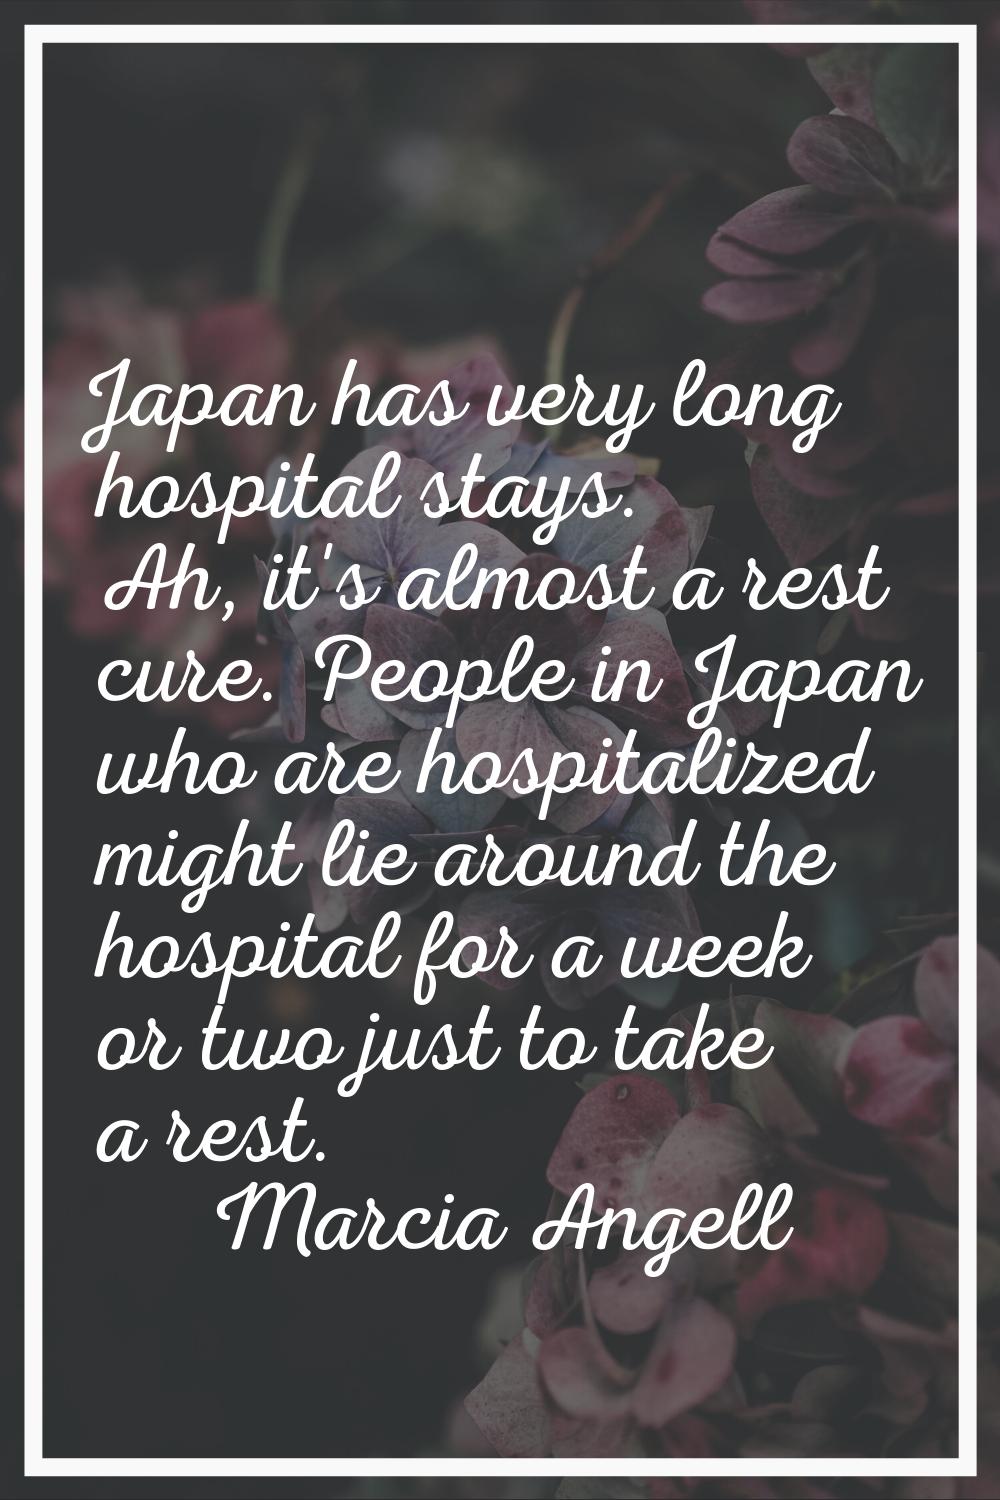 Japan has very long hospital stays. Ah, it's almost a rest cure. People in Japan who are hospitaliz